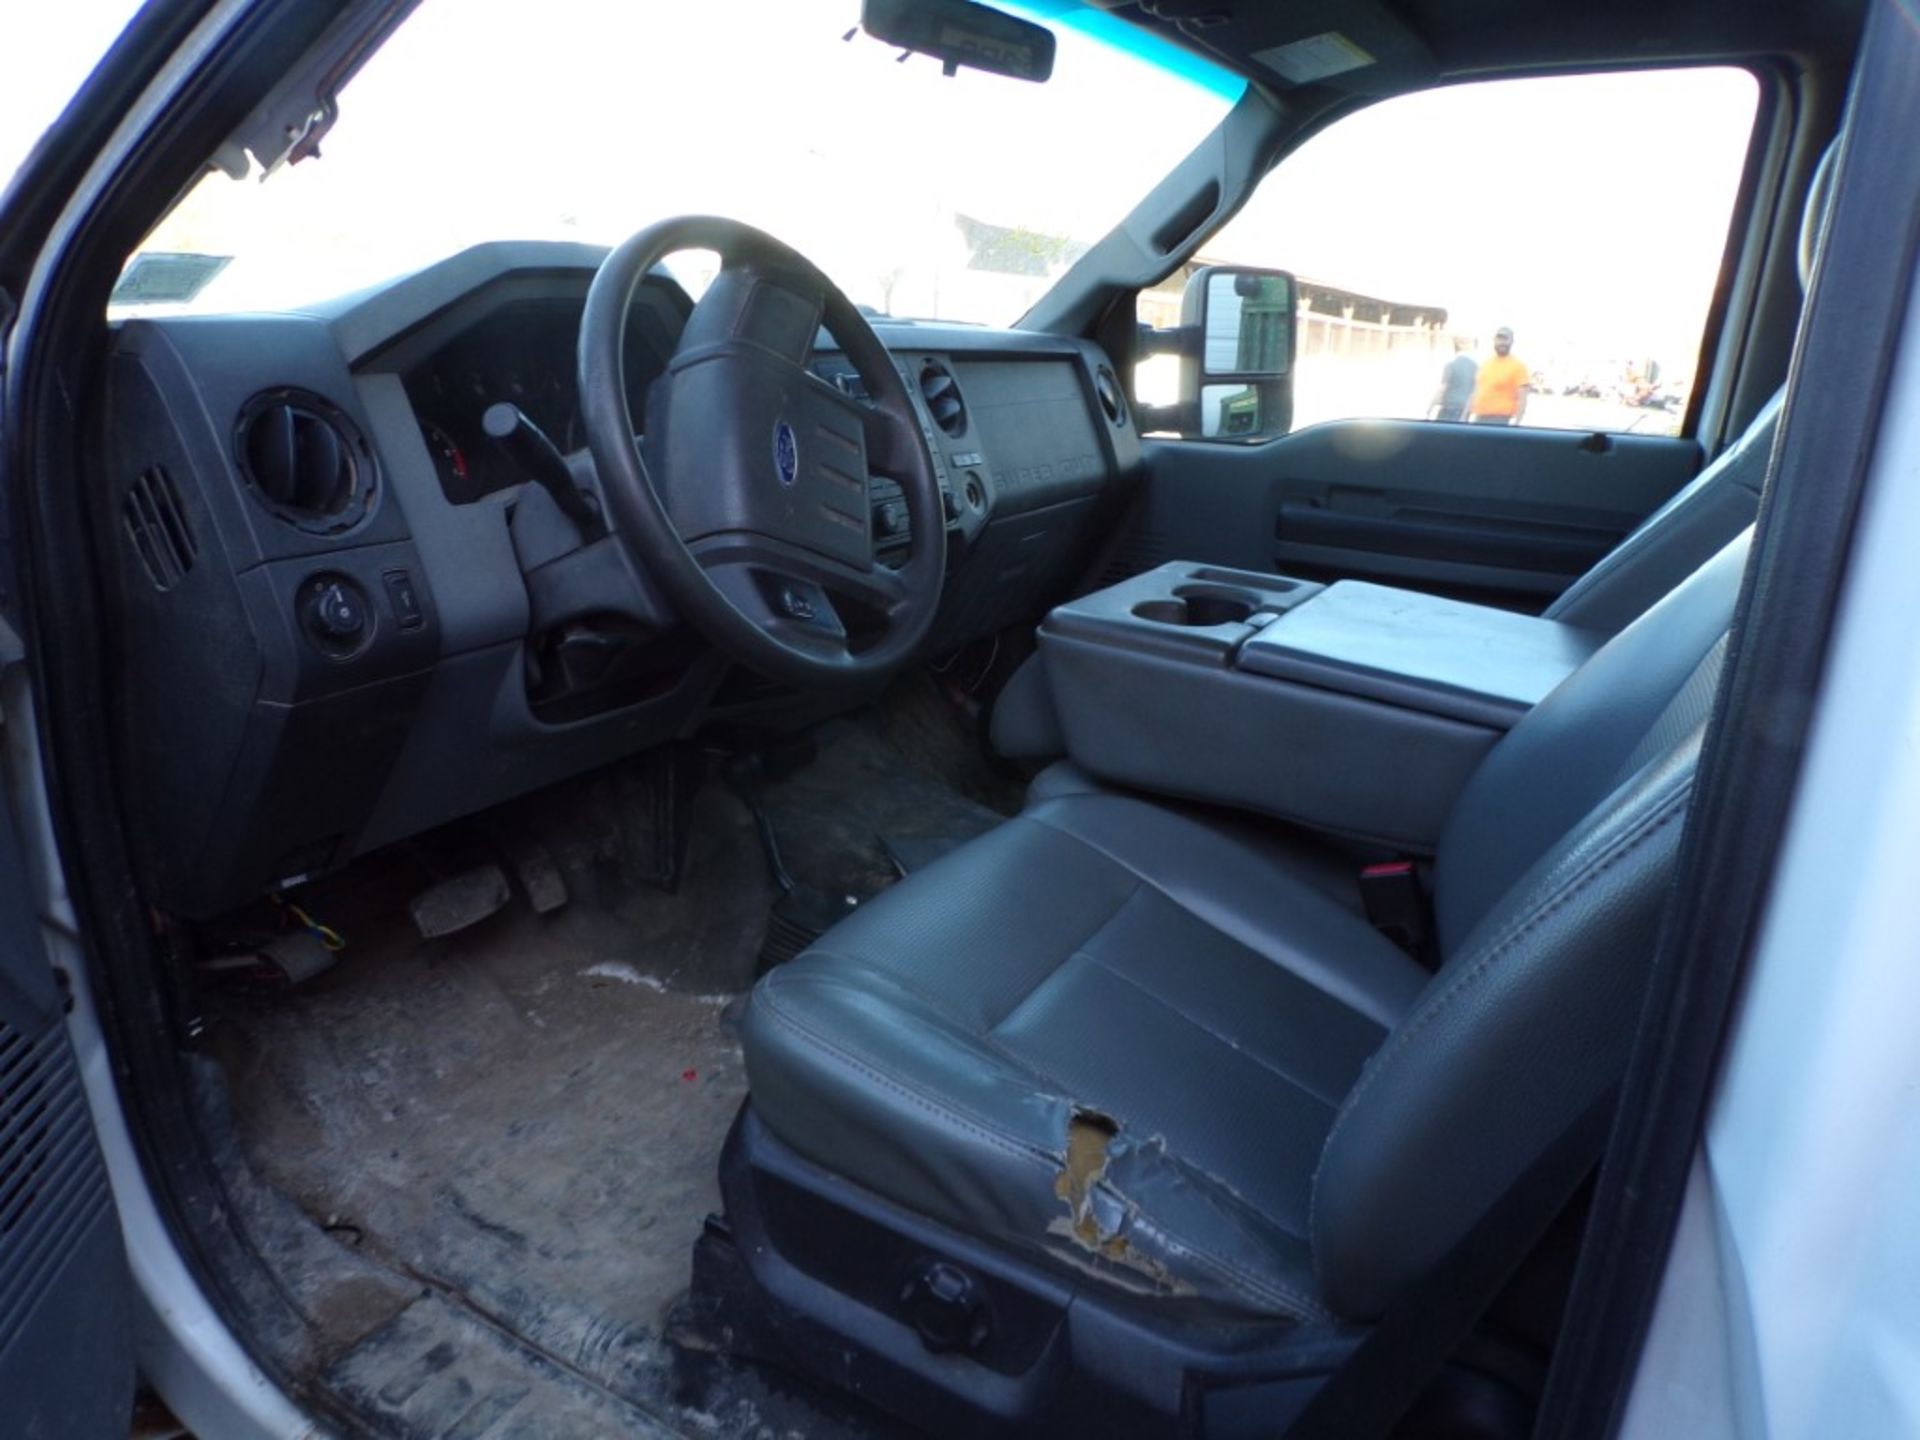 2012 Ford F-150 4 WD Reg Cab with 8' Box, Auto, 158,726 Miles, Vin # 1FTBF2B69CEA04879 - HAVE - Image 6 of 6